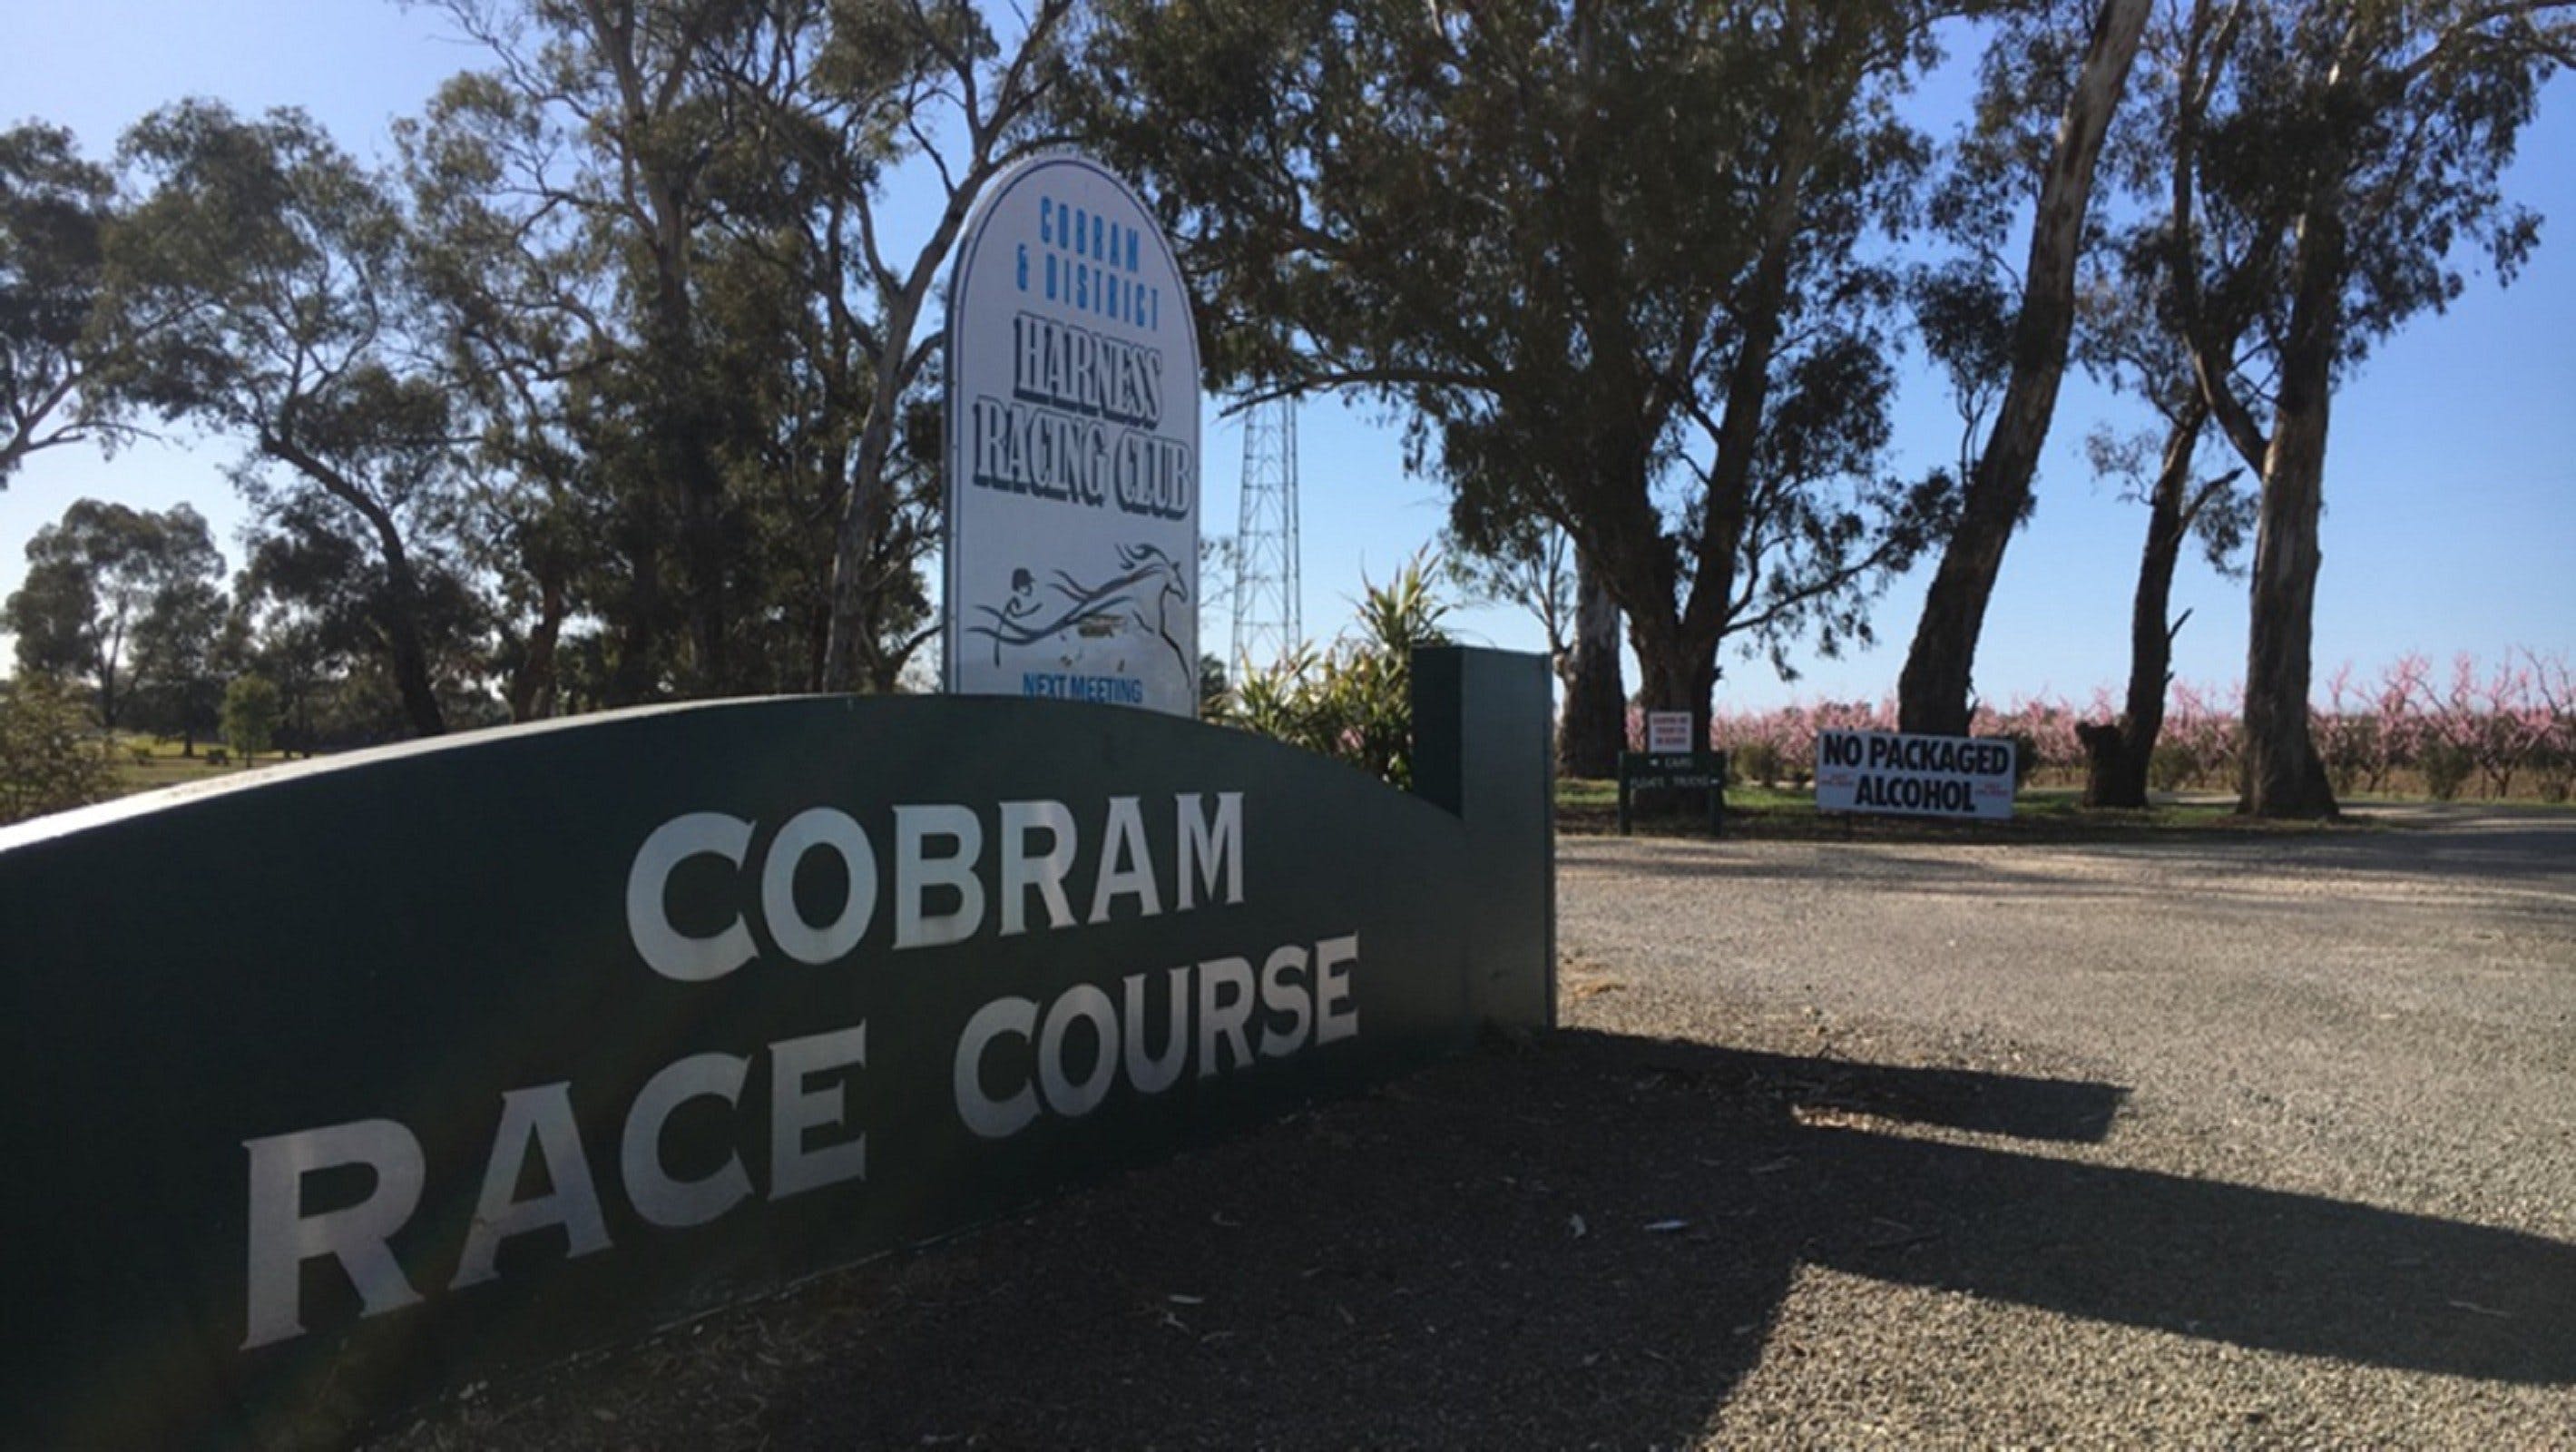 Cobram and District Harness Racing Club - Geraldton Accommodation